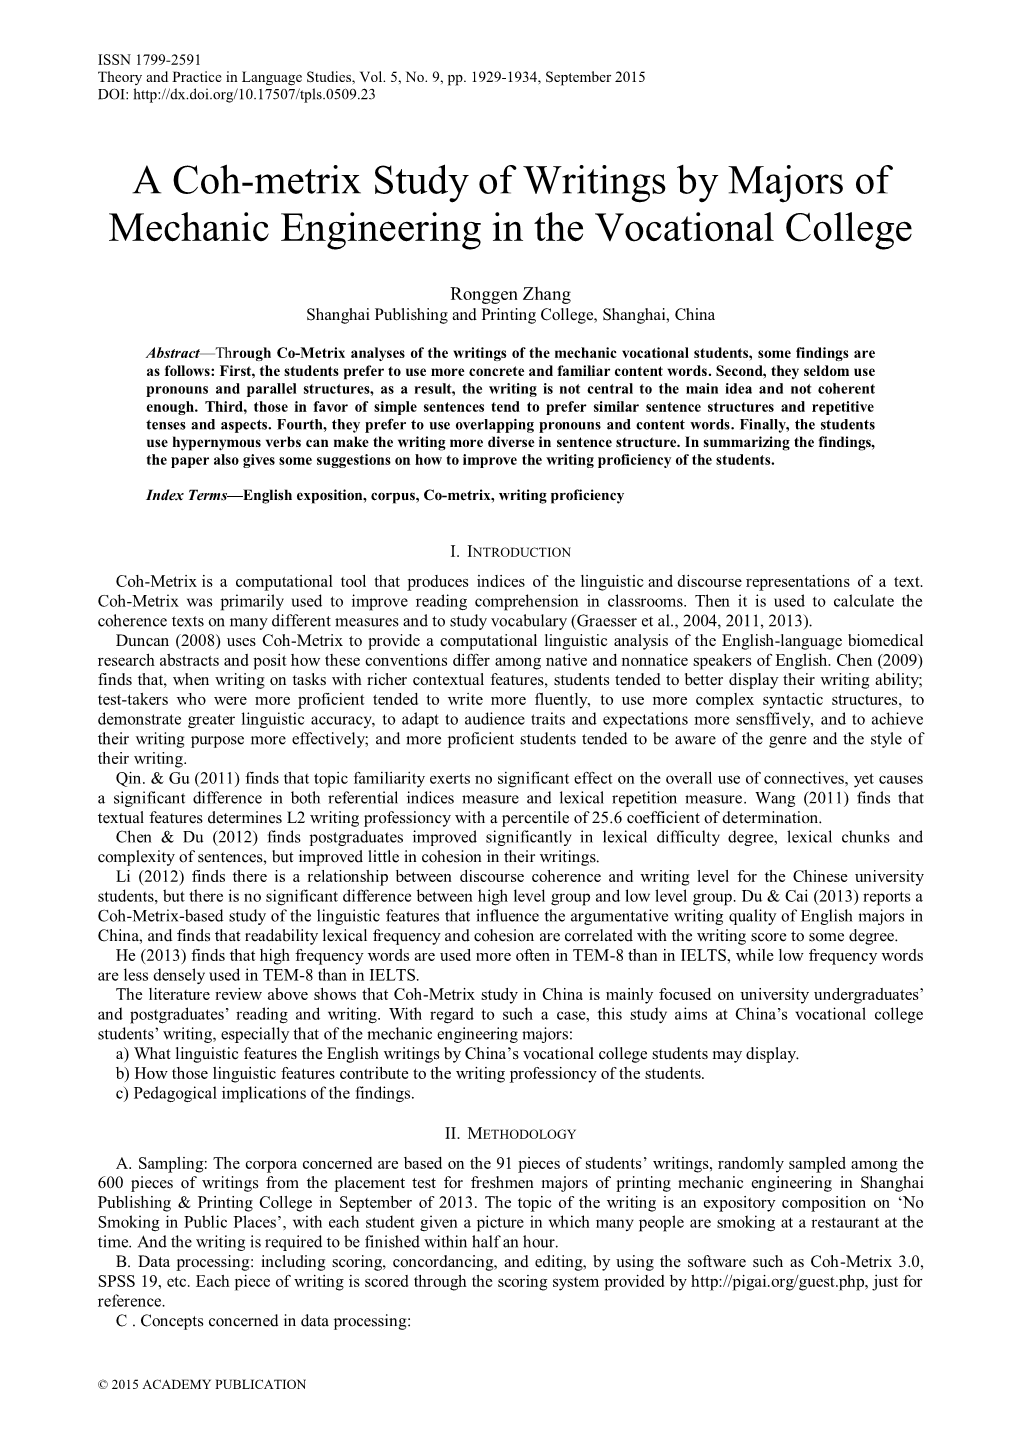 A Coh-Metrix Study of Writings by Majors of Mechanic Engineering in the Vocational College